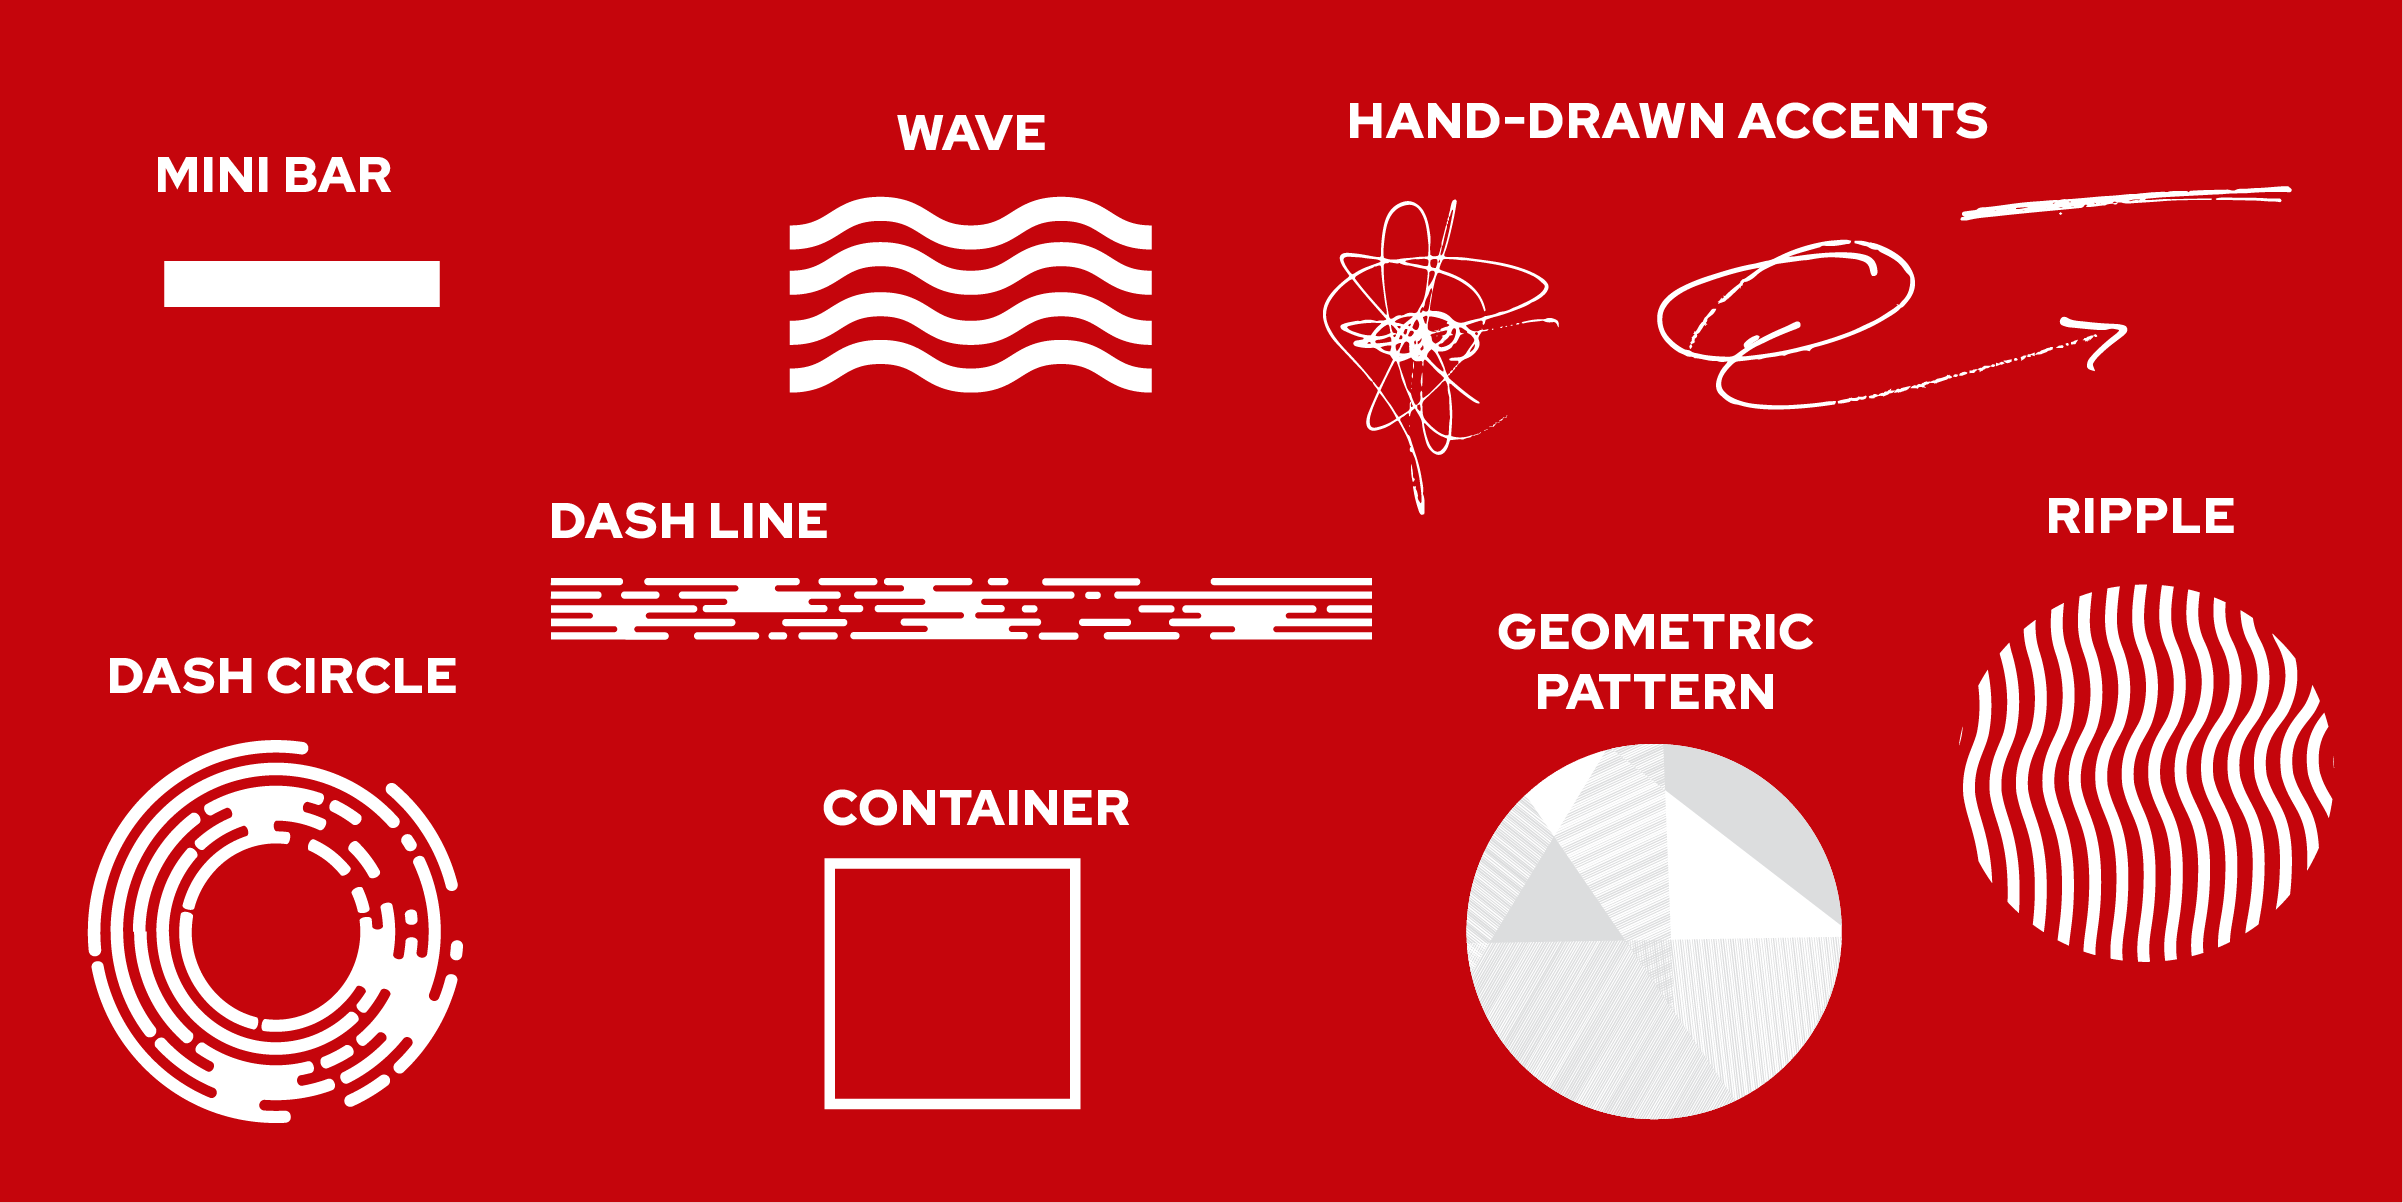 Examples of elements for use with the UW–Madison brand.